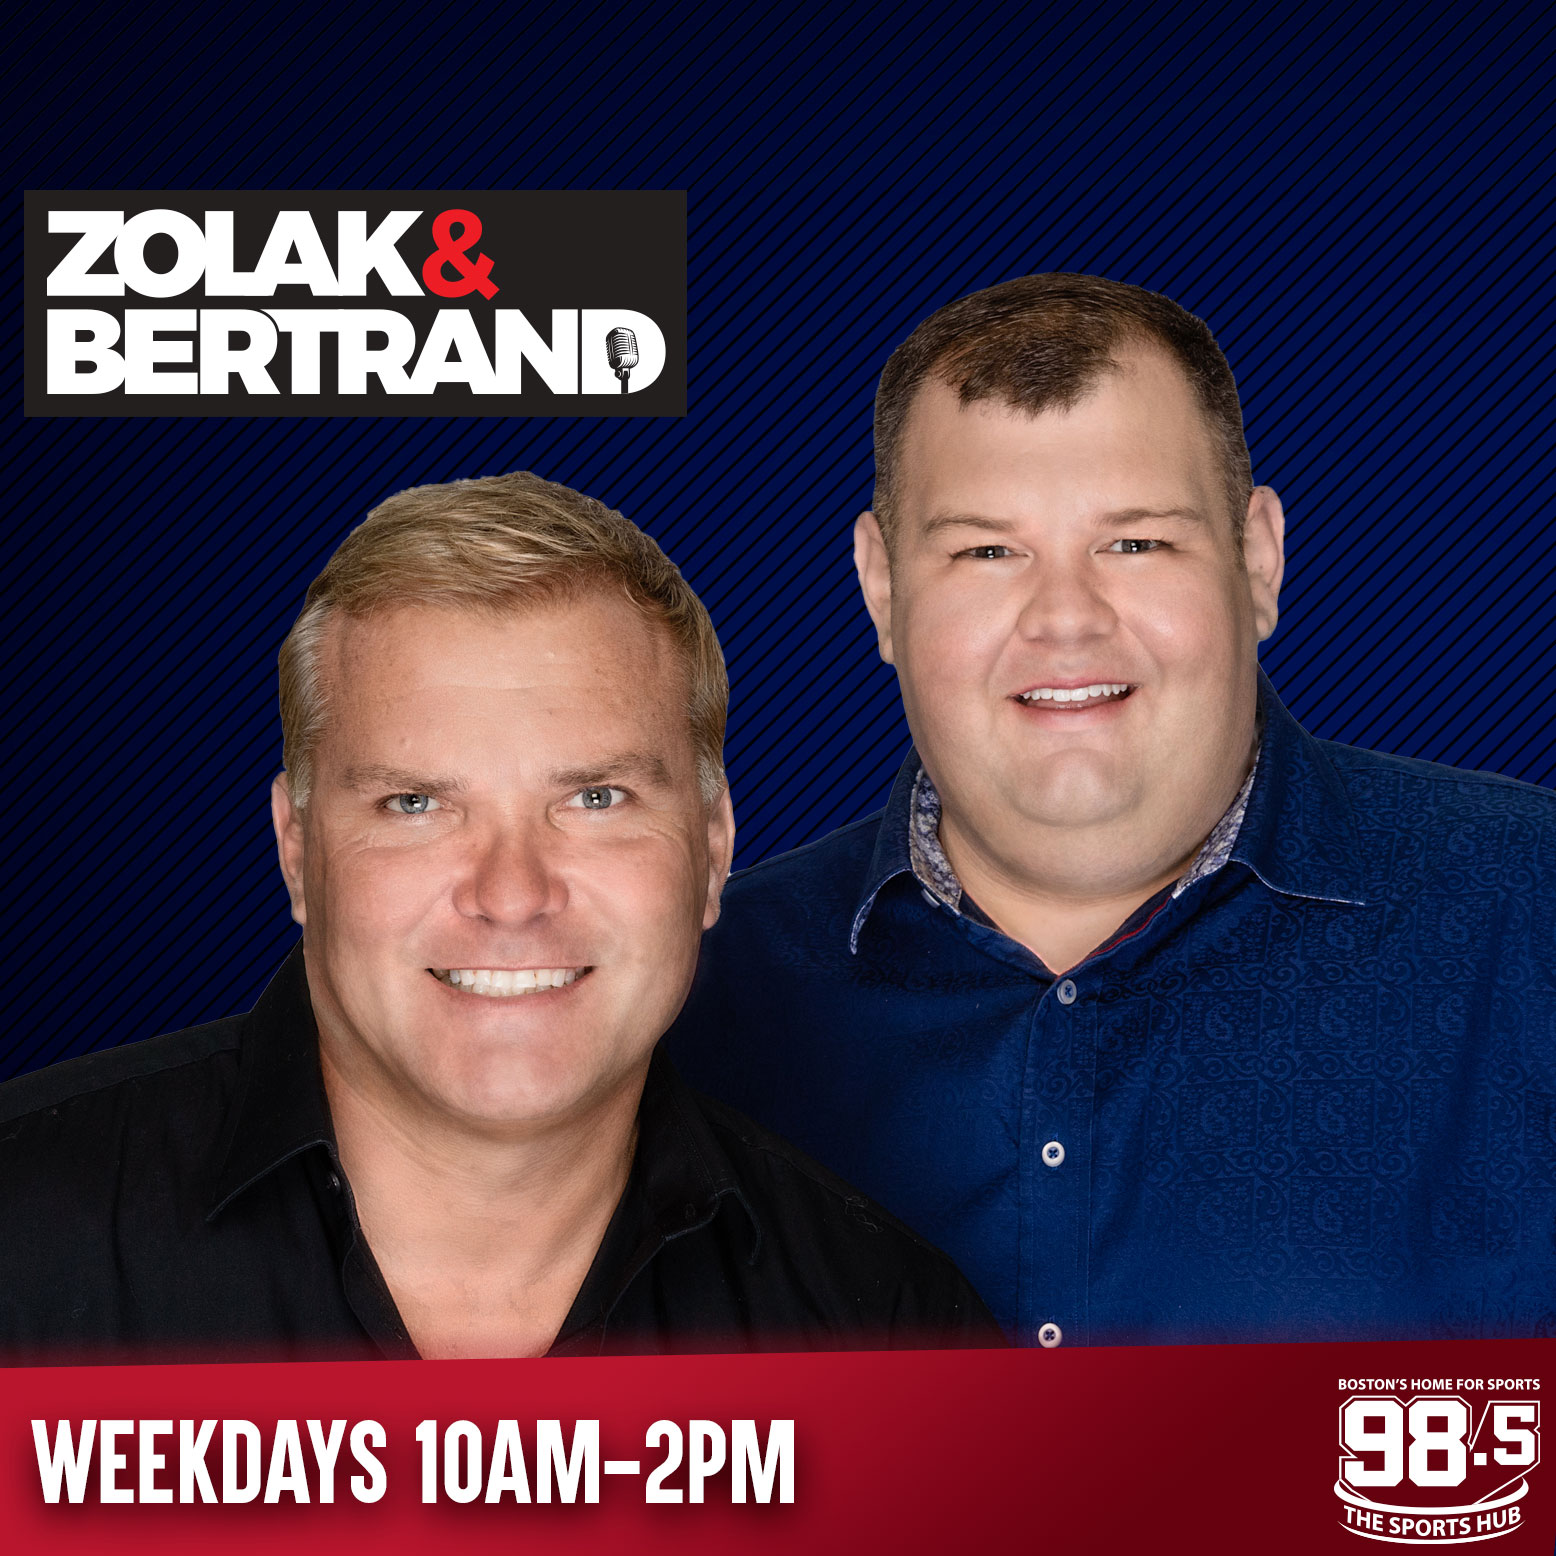 Zolak & Bertrand: Phil Perry on the Patriots usage of JuJu Smith-Schuster in Week 1